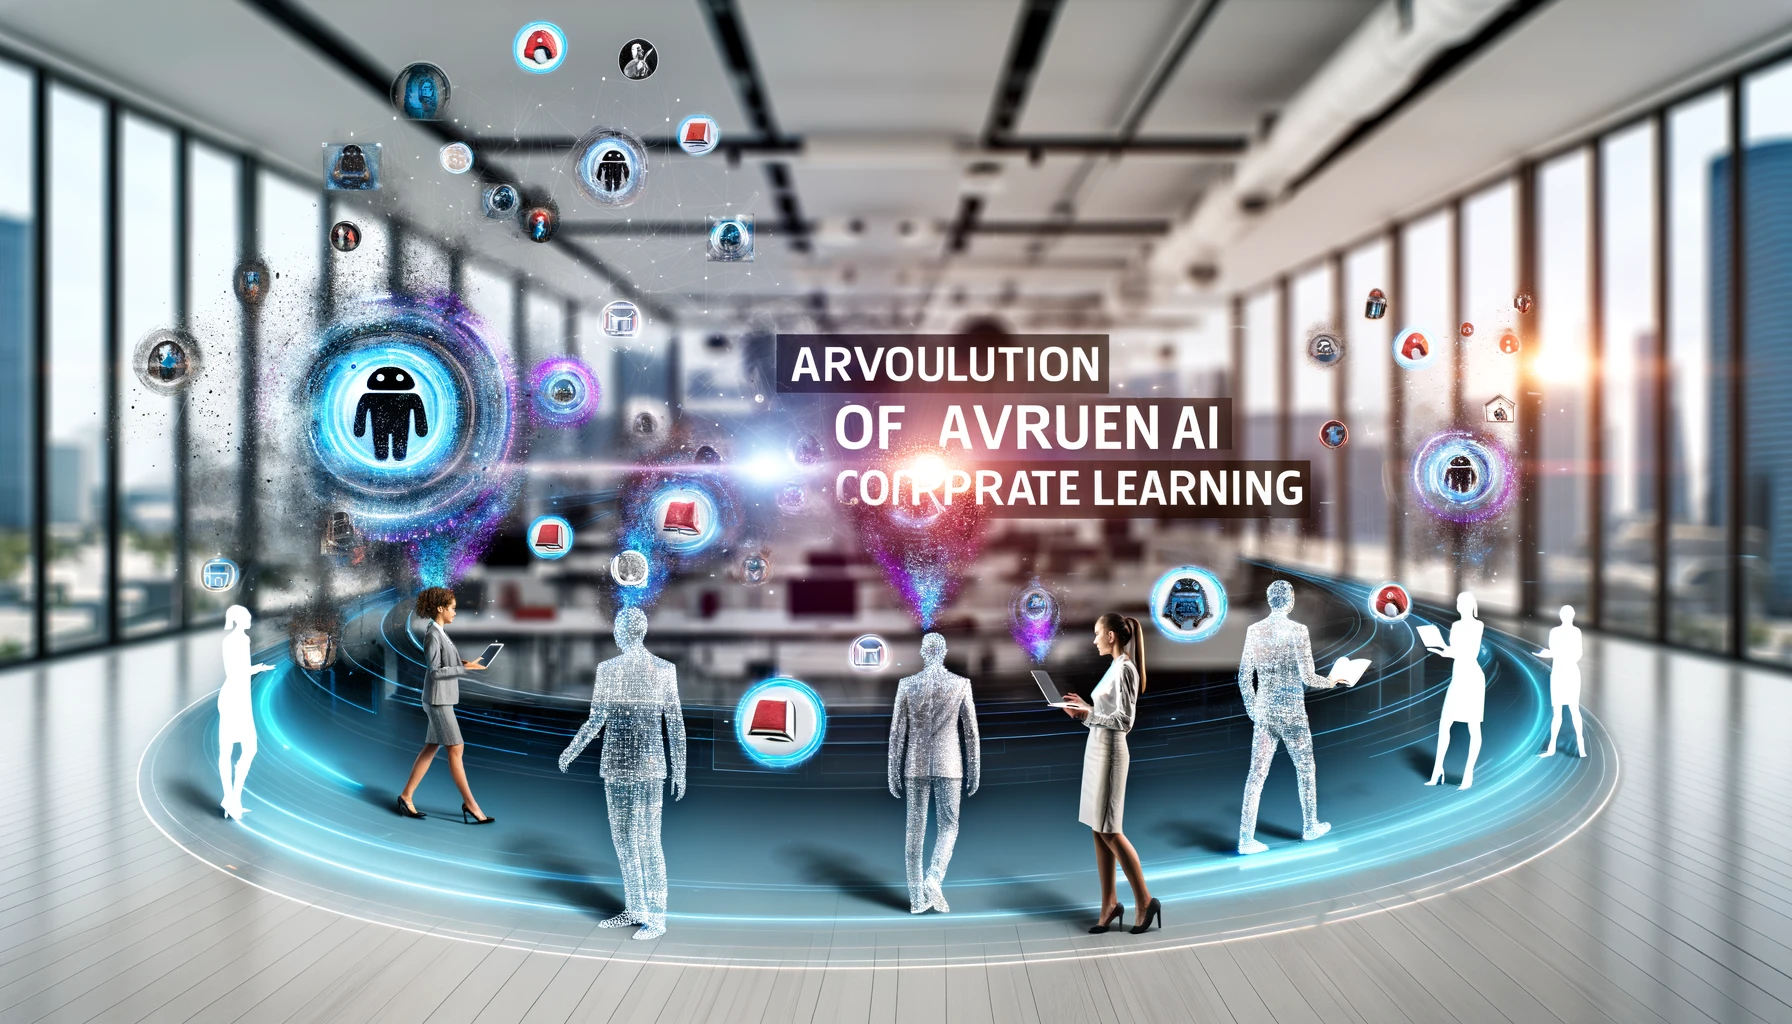 Autonomous Corporate Learning Platforms: Arriving Now, Powered by AI